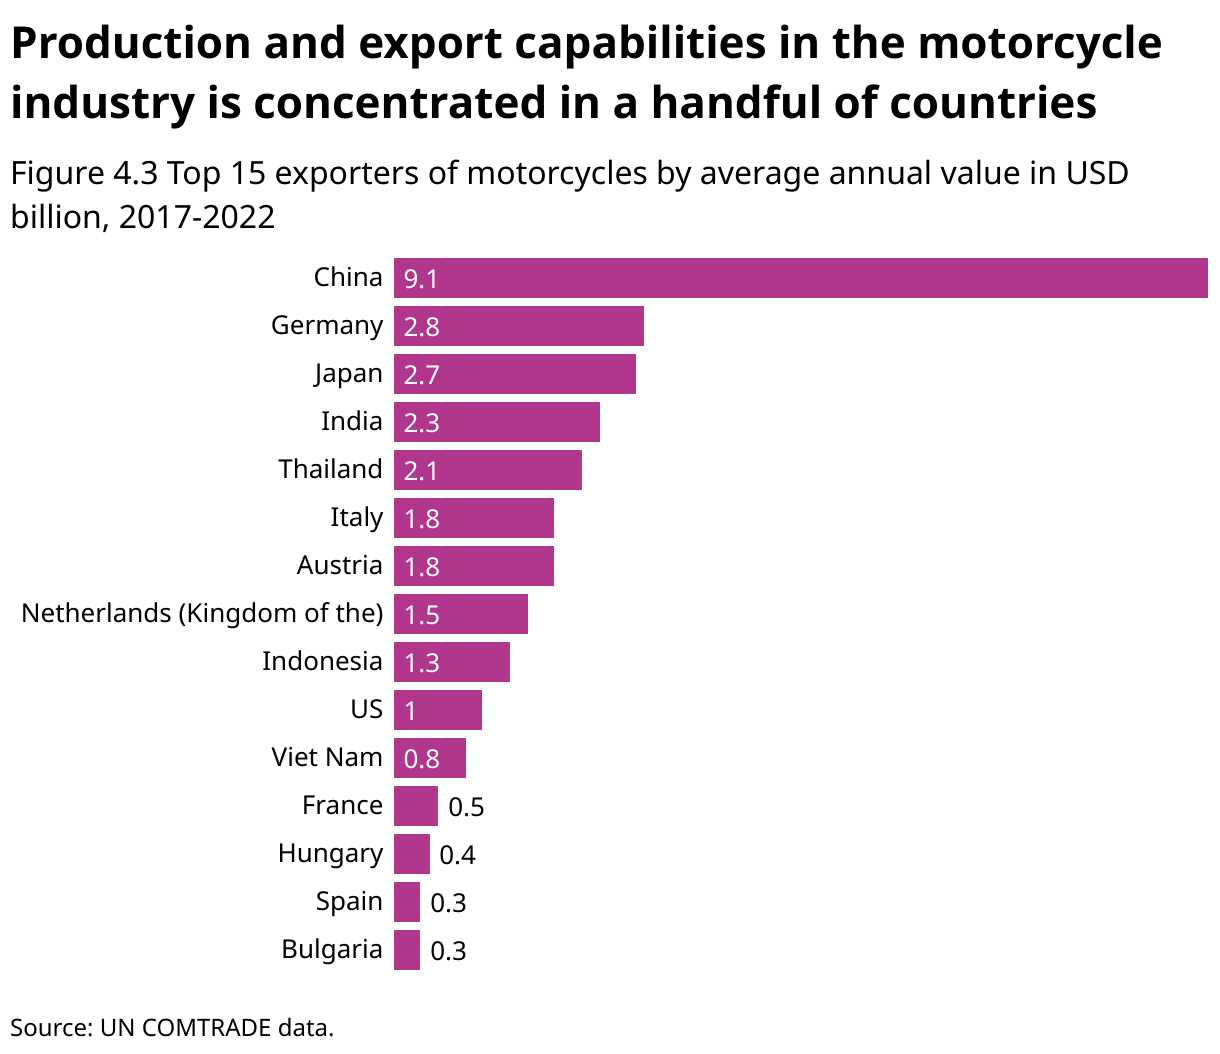 This bar chart illustrates the top 15 exporters of motorcycles from 2017 to 2022. The chart is organized with each country listed along the vertical axis and the export volumes in billions of US dollars along the horizontal axis. China is the largest exporter with 9.1 billion dollars in exports. Germany and Japan follow with 2.8 and 2.7 billion dollars, respectively. Other notable exporters include India with 2.3 billion, Thailand with 2.1 billion, and Italy and Austria both at 1.8 billion. The list continues with the Netherlands at 1.5 billion, Indonesia at 1.3 billion, the US at 1 billion, Vietnam at 0.8 billion, France at 0.5 billion, Hungary at 0.4 billion, and Spain and Bulgaria both at 0.3 billion. Each bar represents a country’s export volume, depicted in descending order.